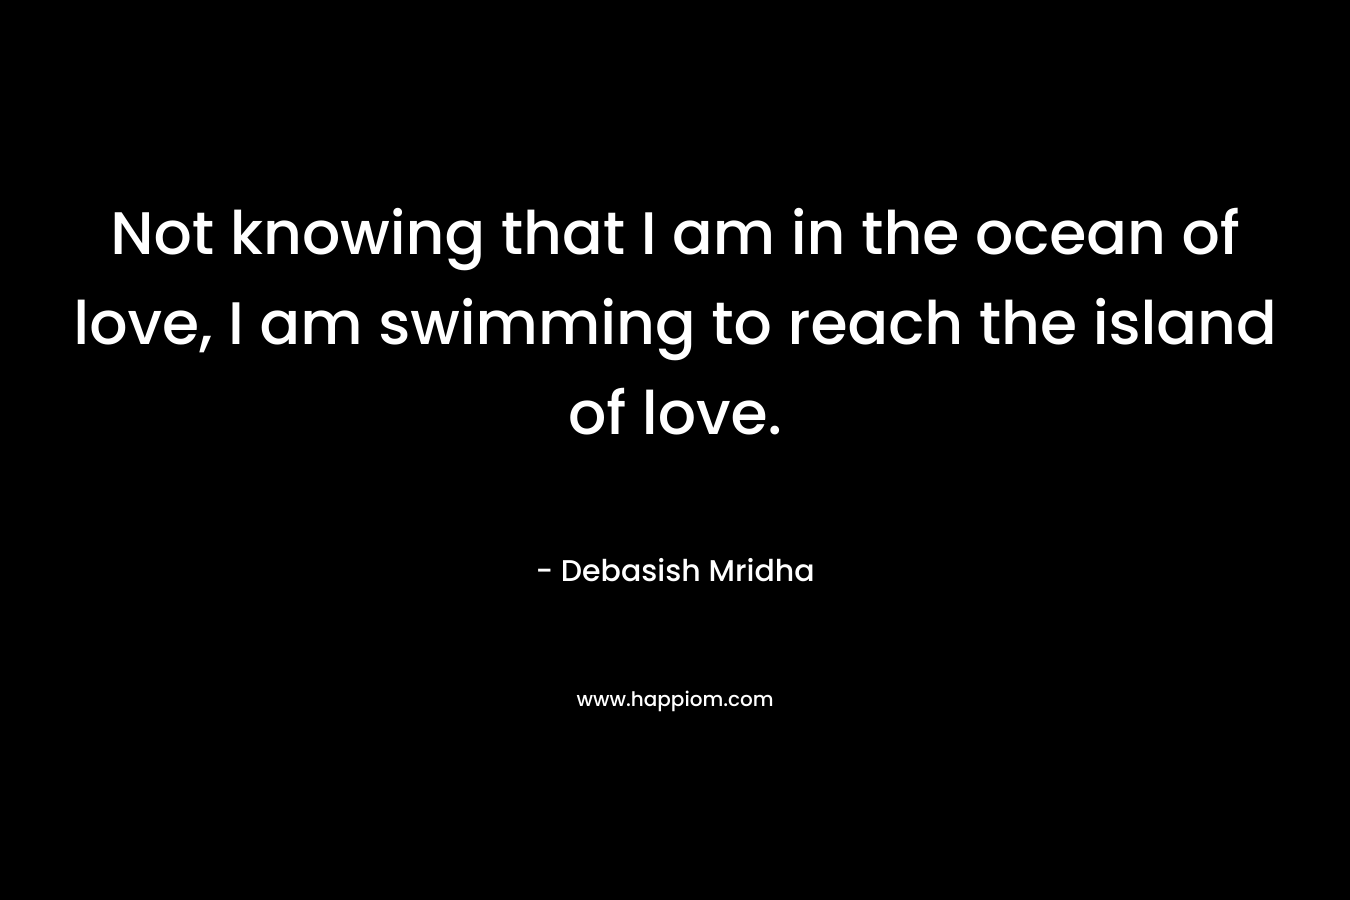 Not knowing that I am in the ocean of love, I am swimming to reach the island of love.